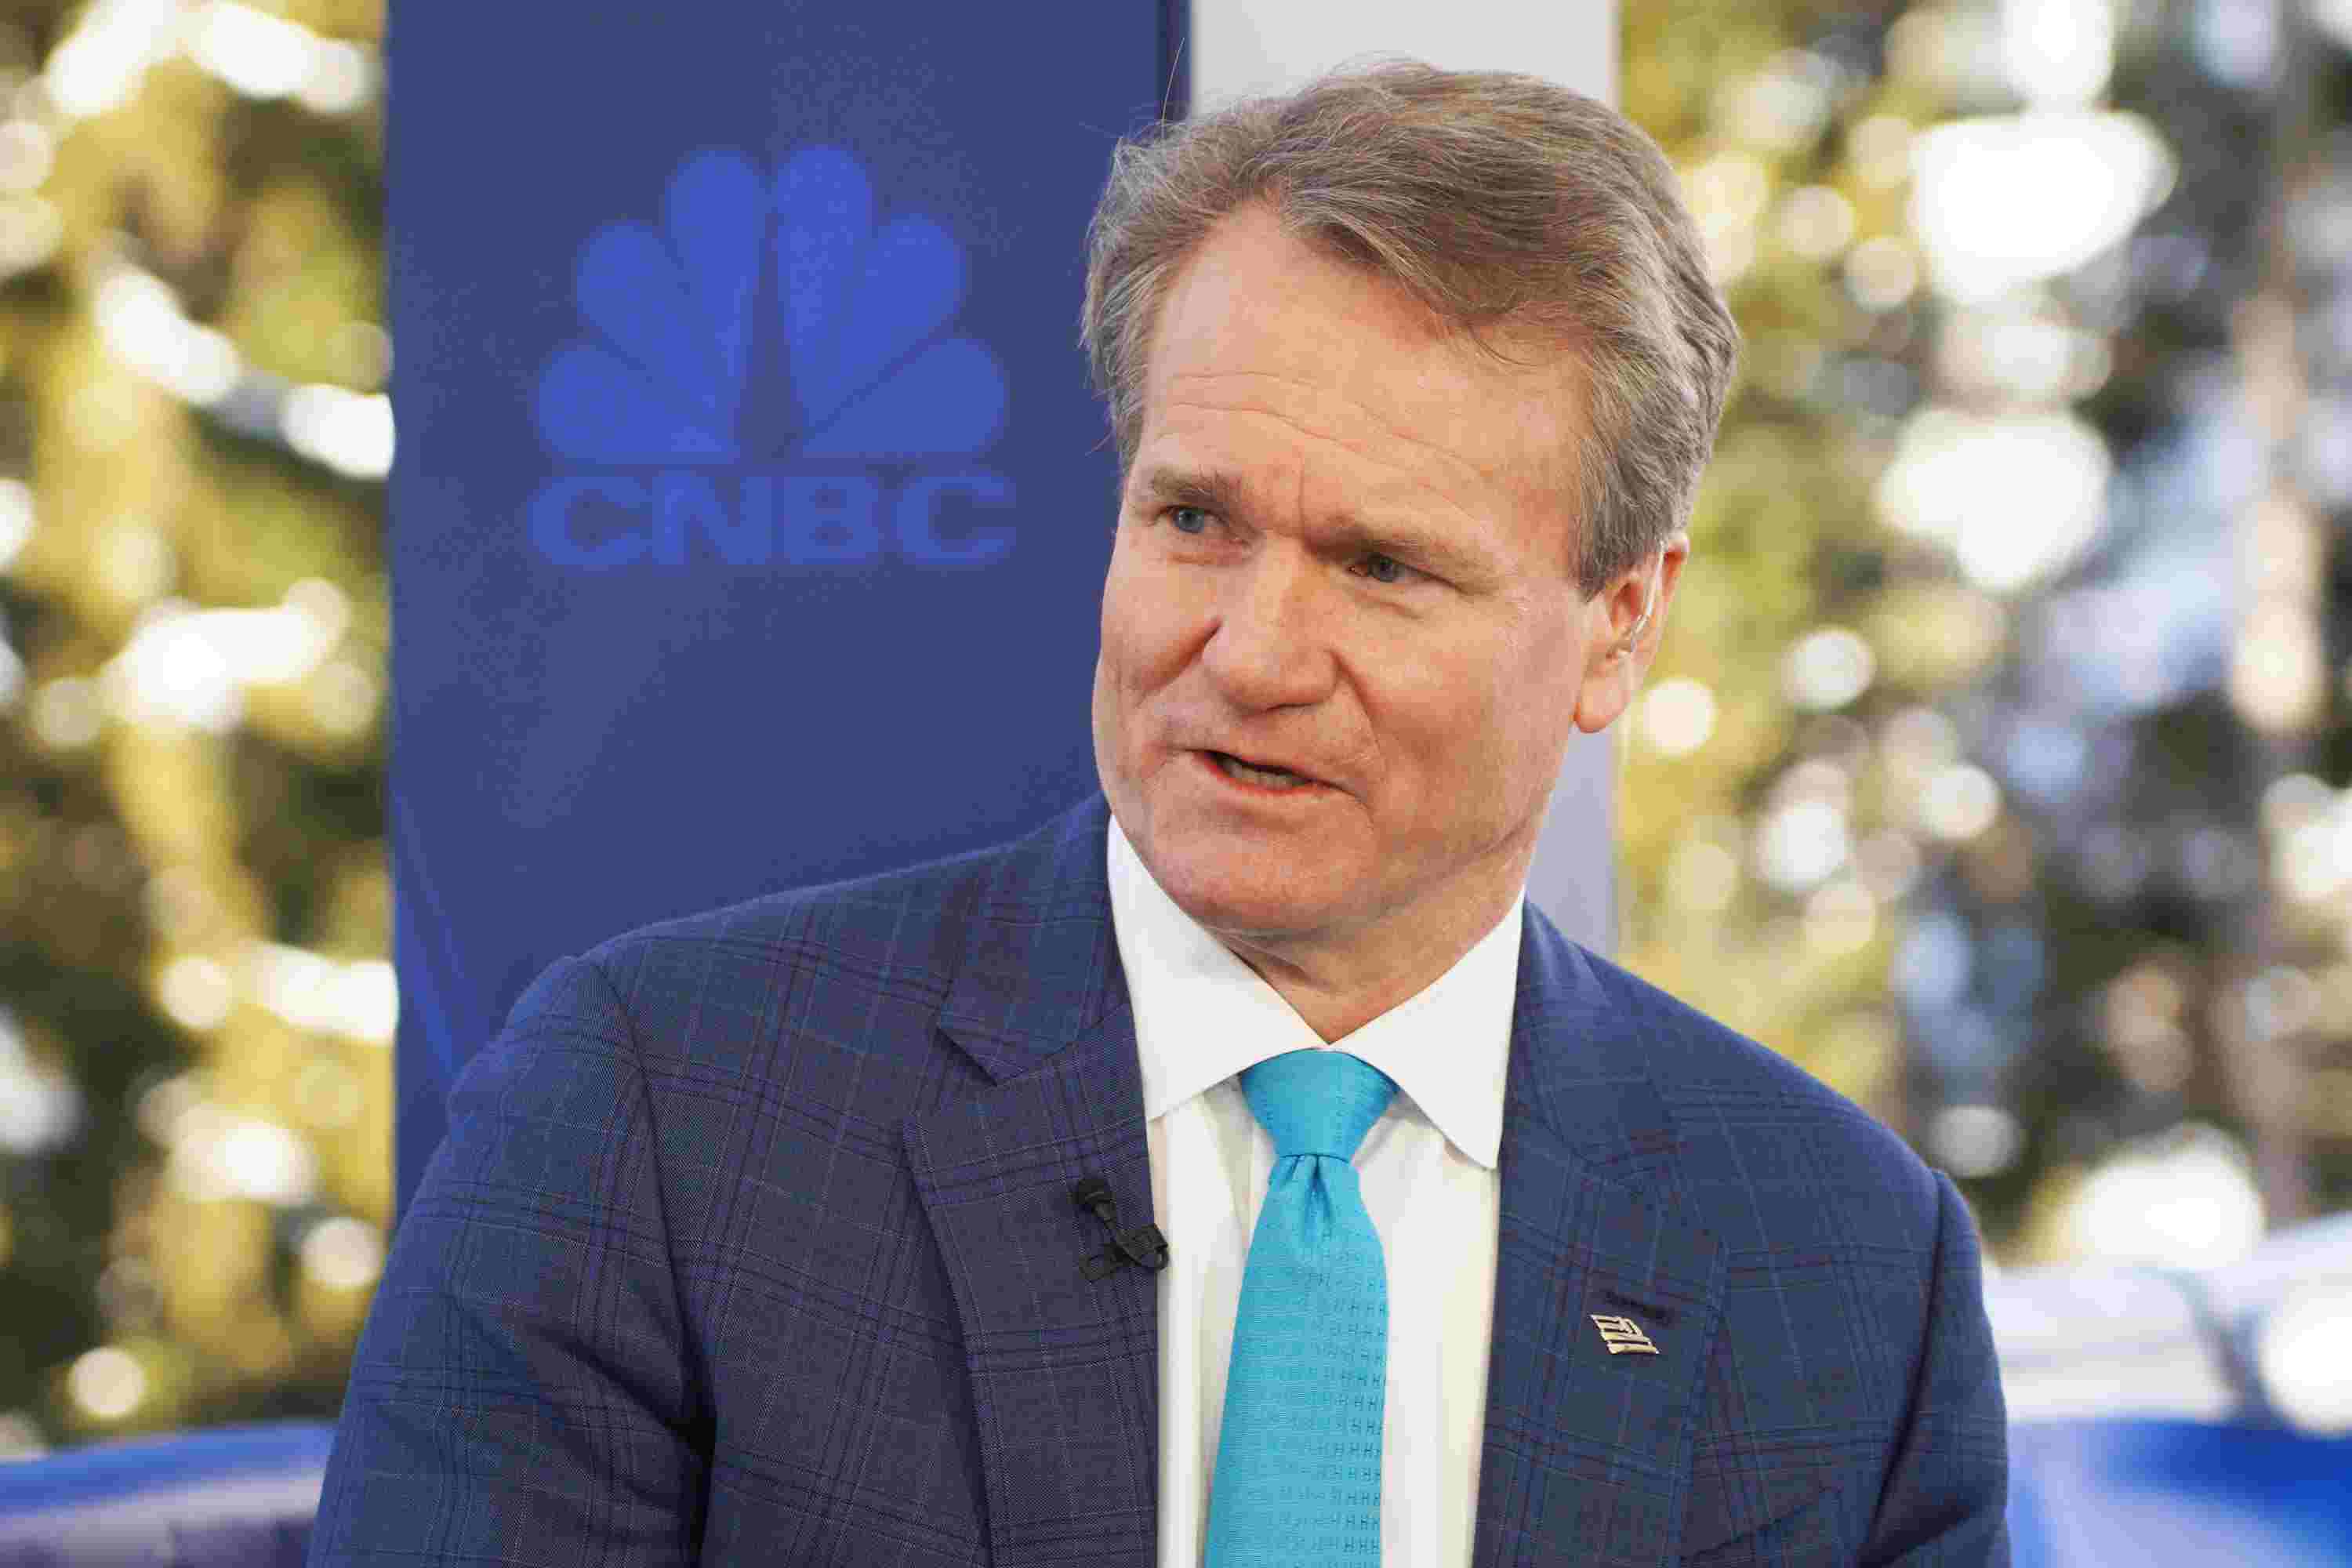 Bank of America CEO says clients want to invest in companies doing right by society